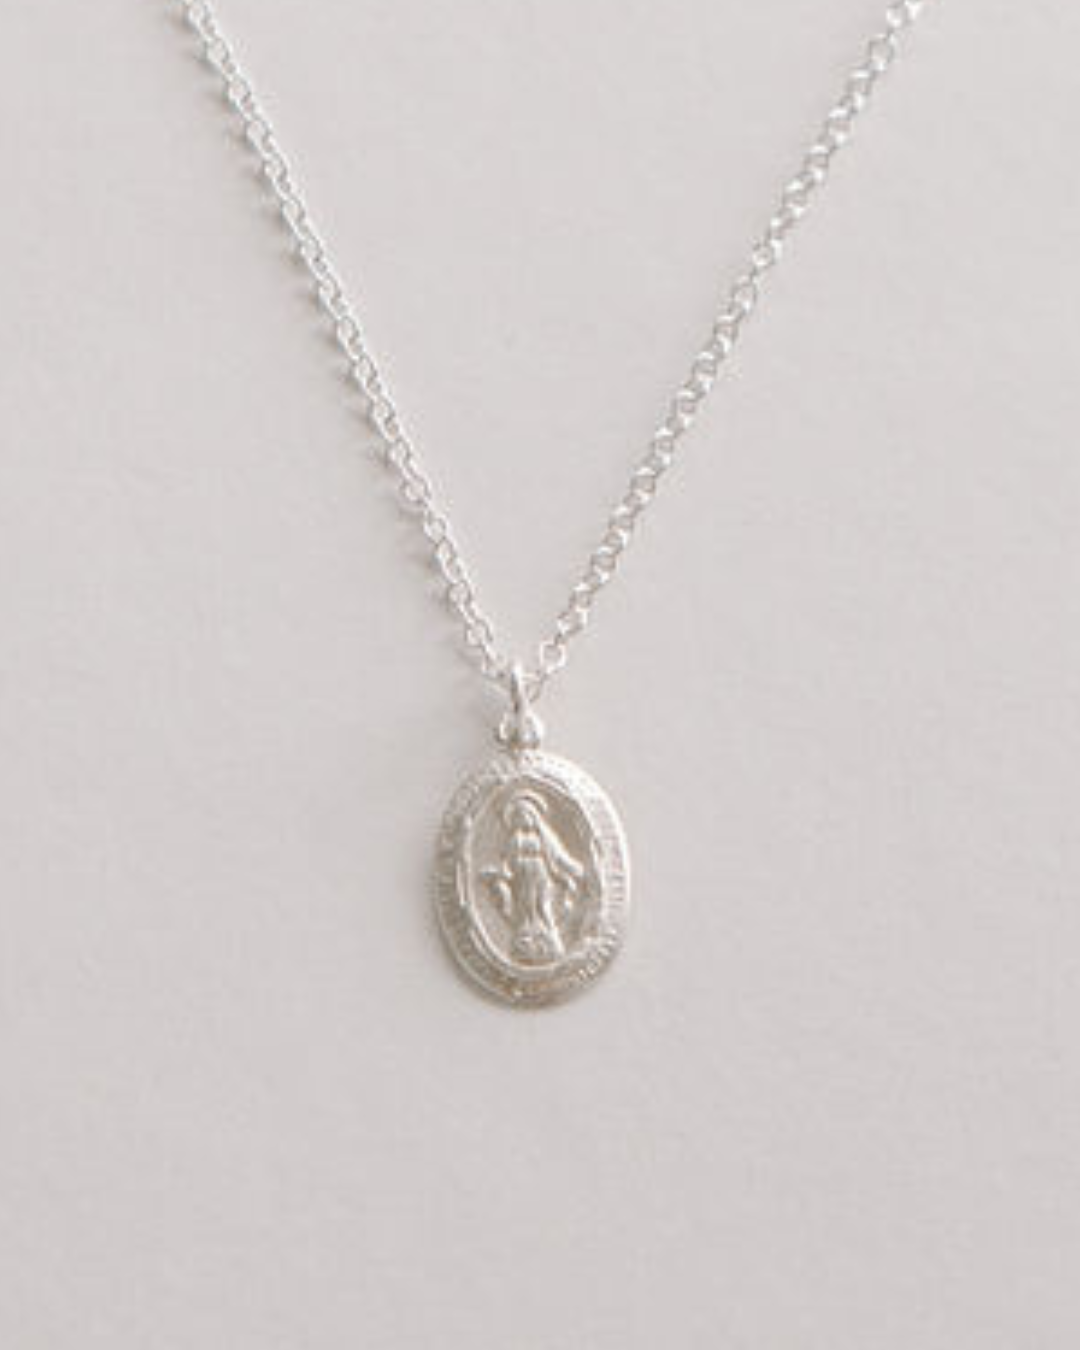 What is the Miraculous Medal